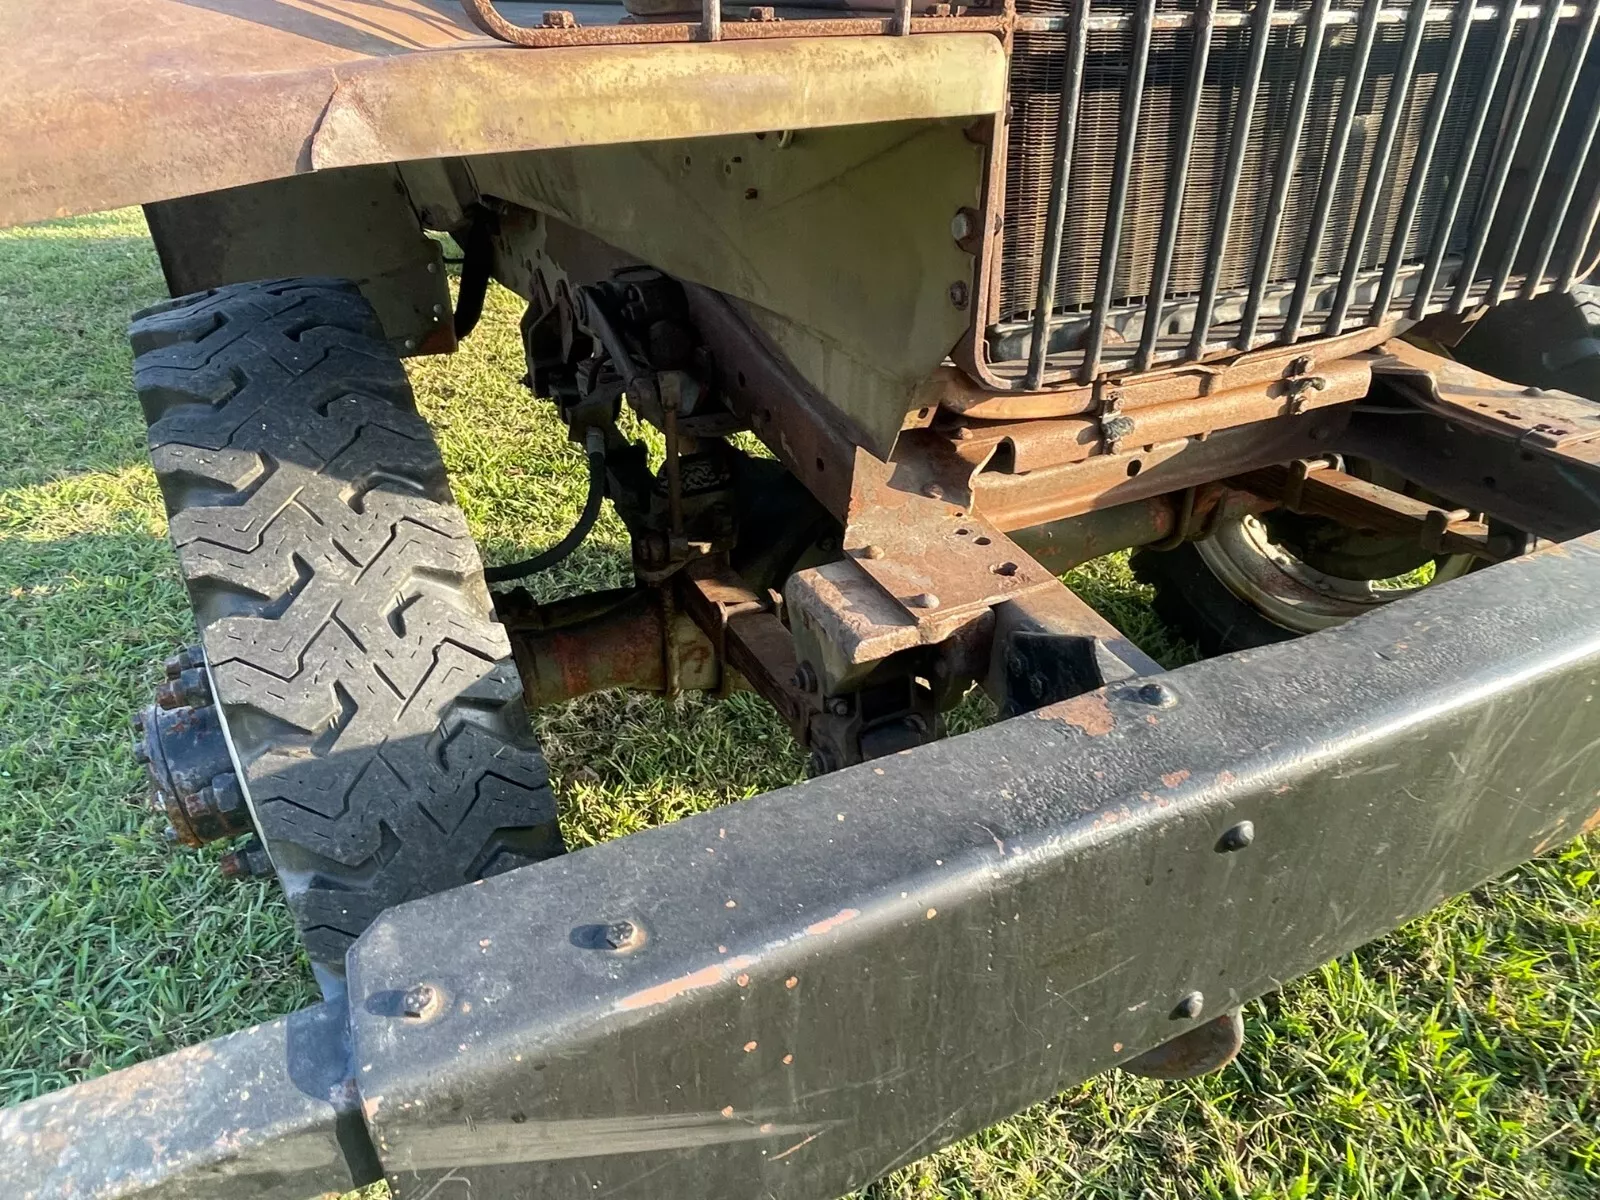 1944 Chevrolet G7107 4×4 – 1.5 ton Low Miles Will Trade